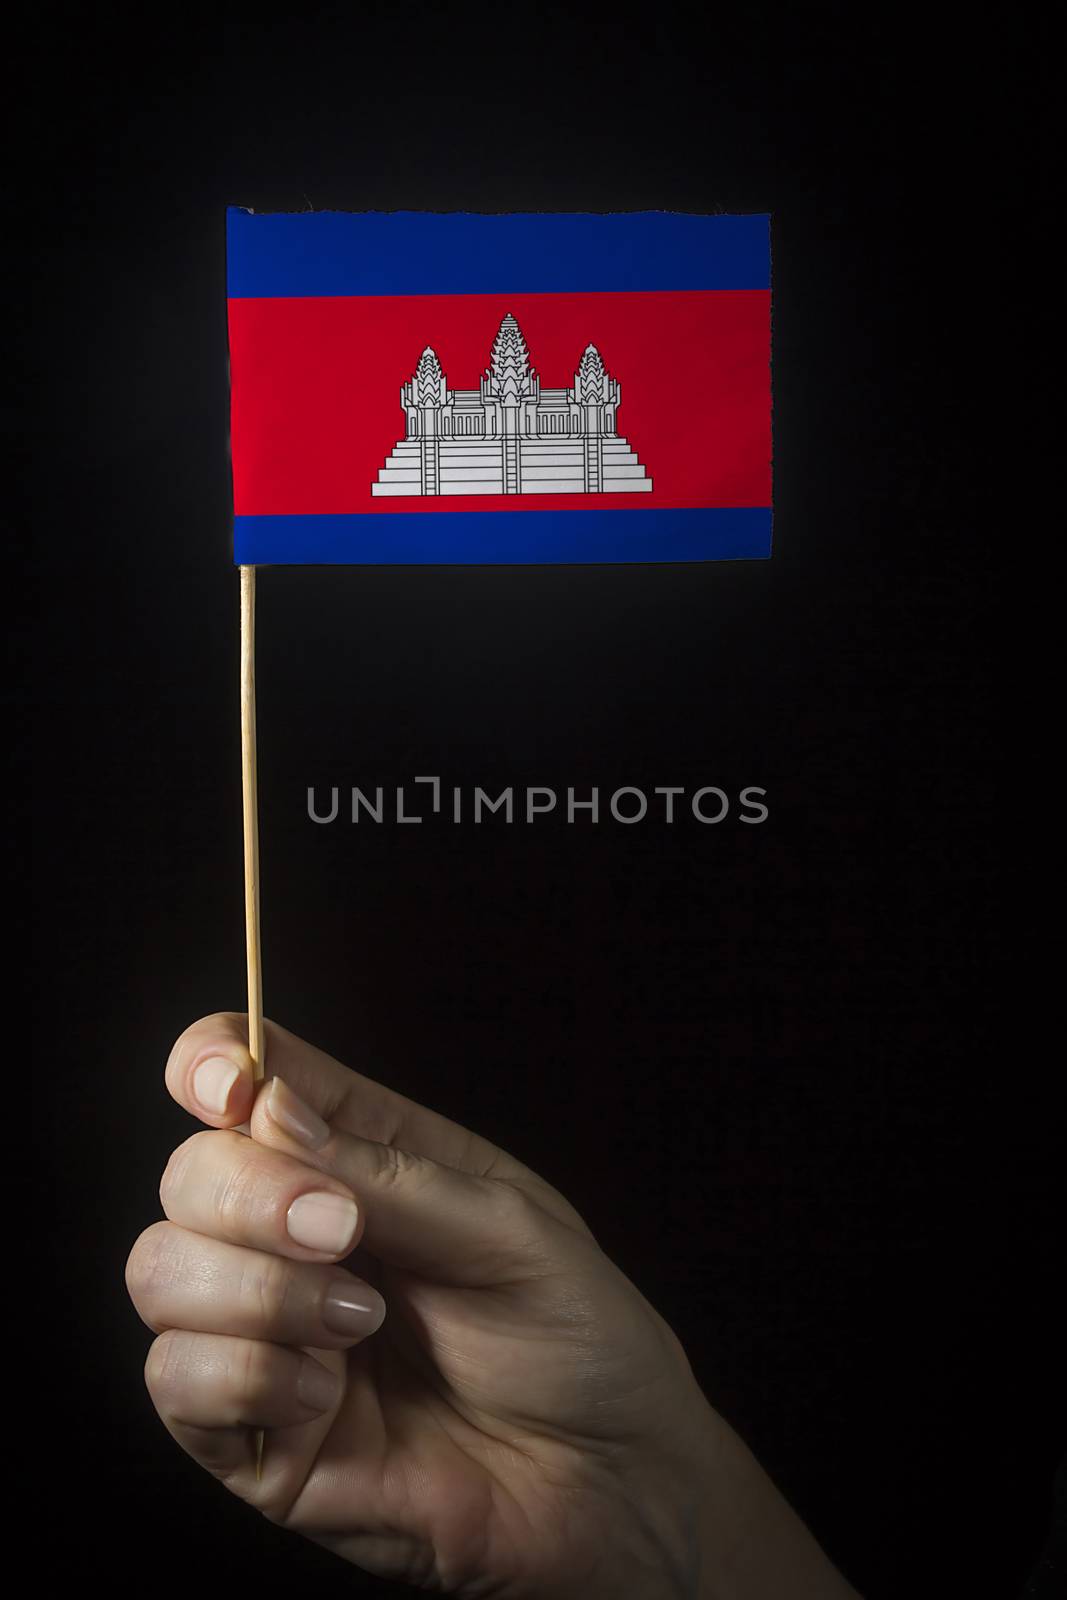 Hand with small flag of state of Cambodia